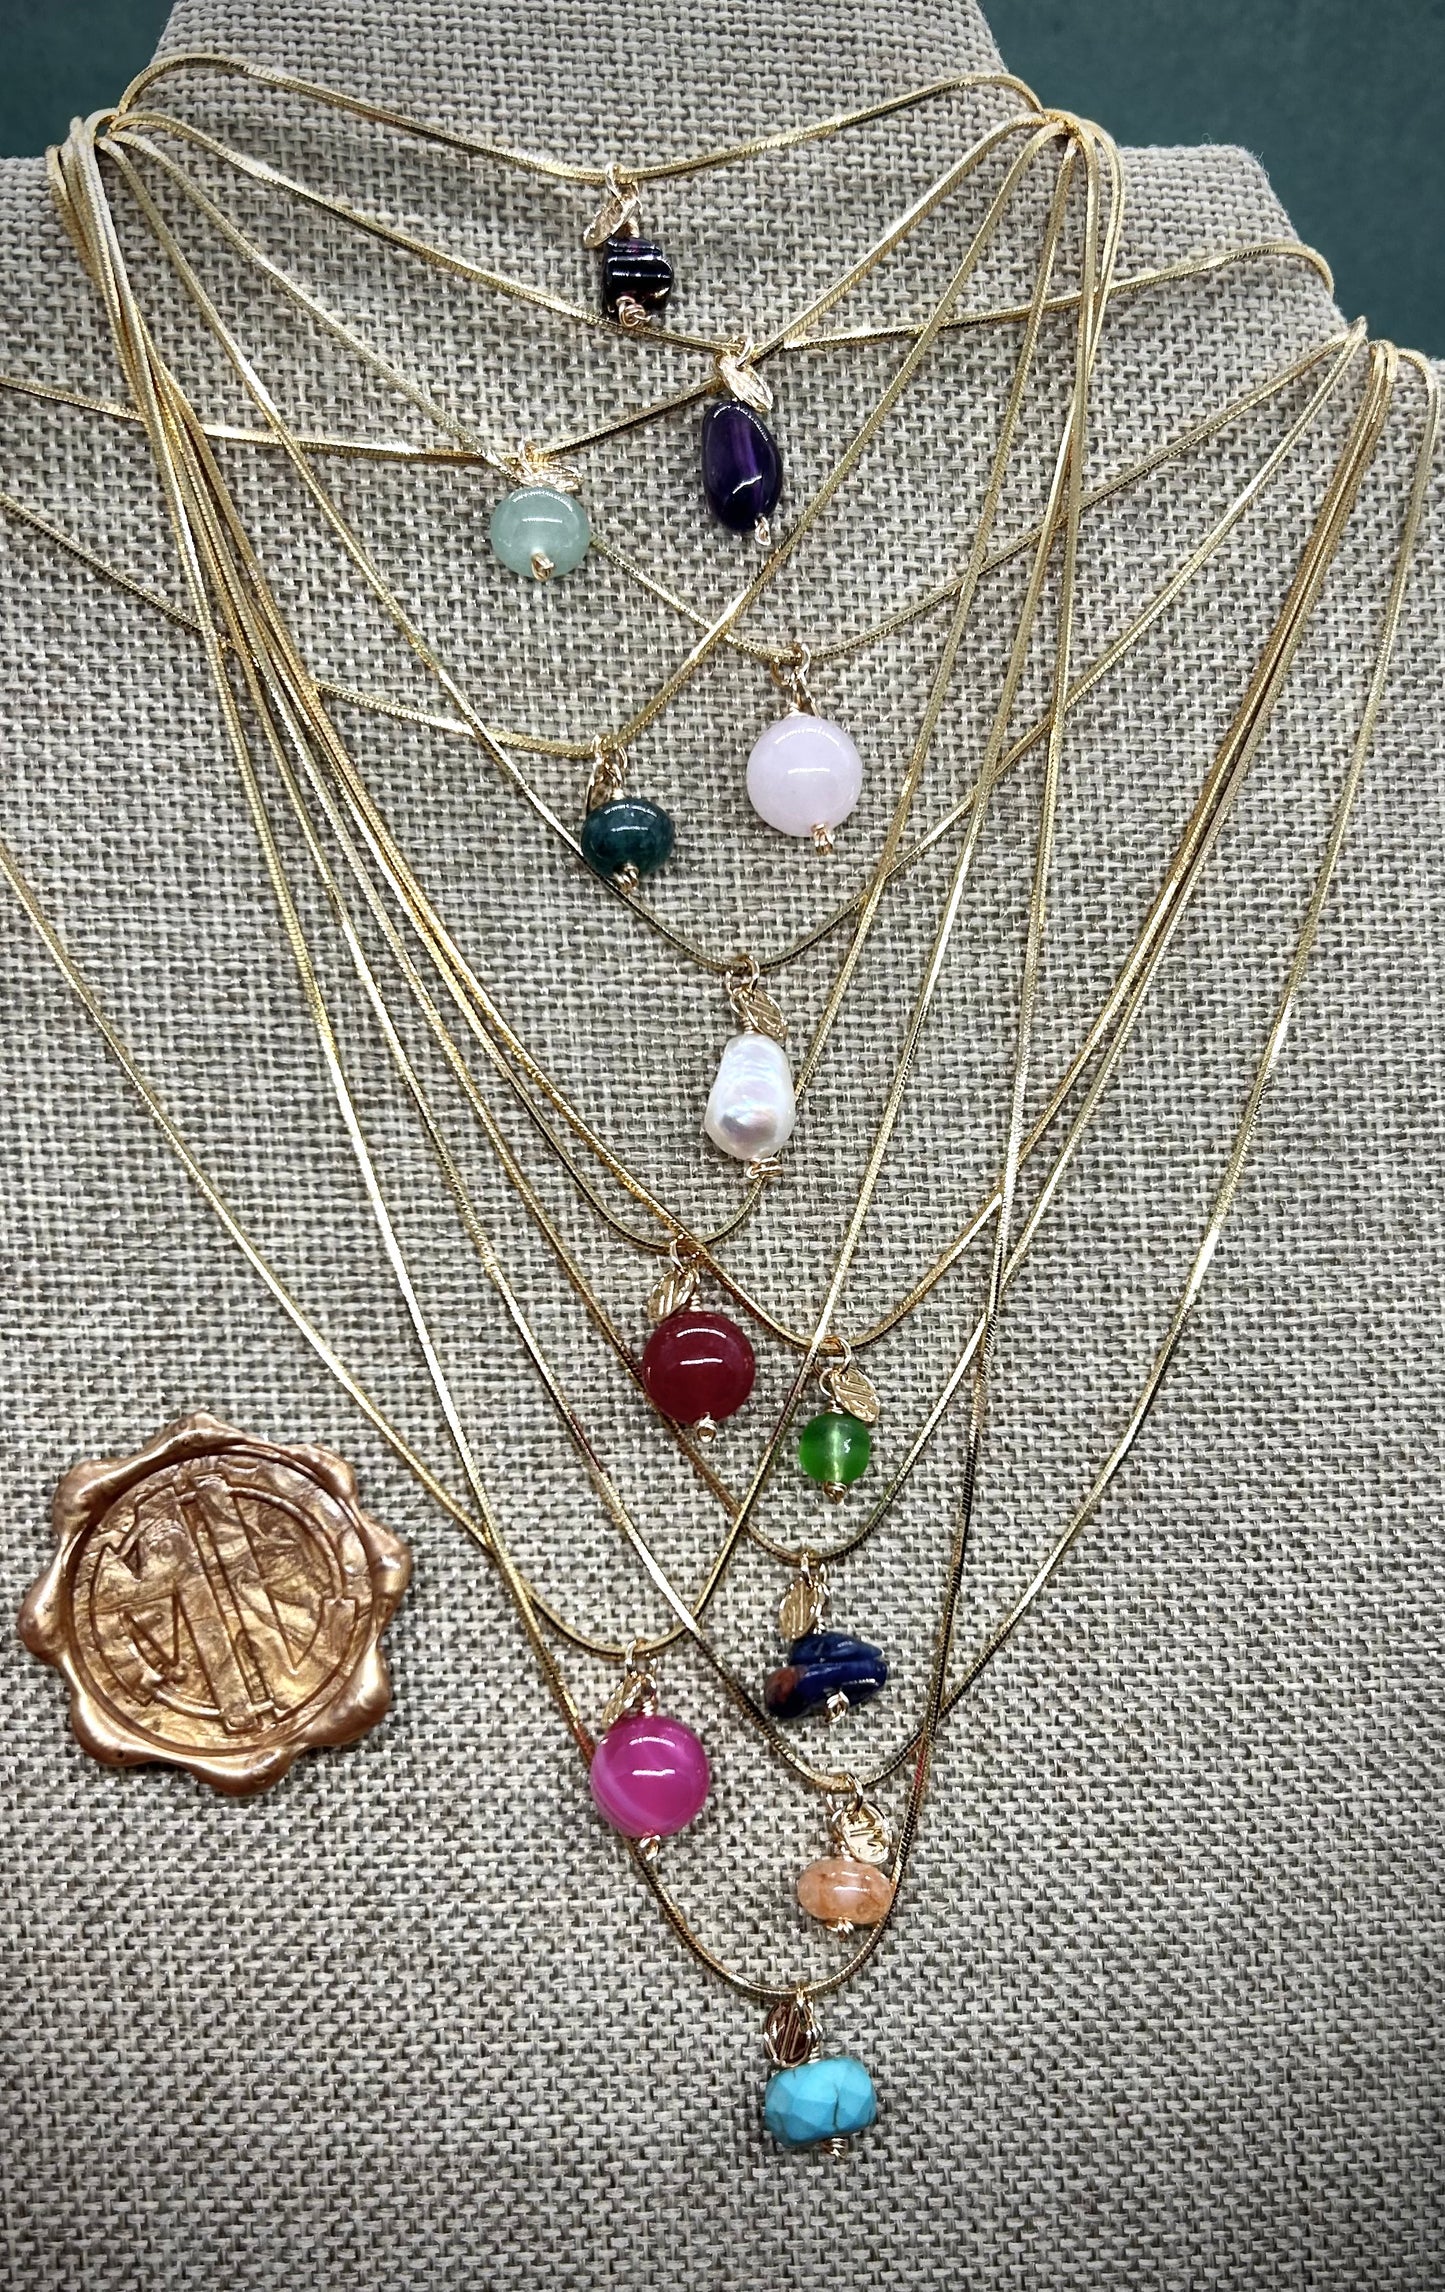 Gems "12 Months of the year" Necklaces